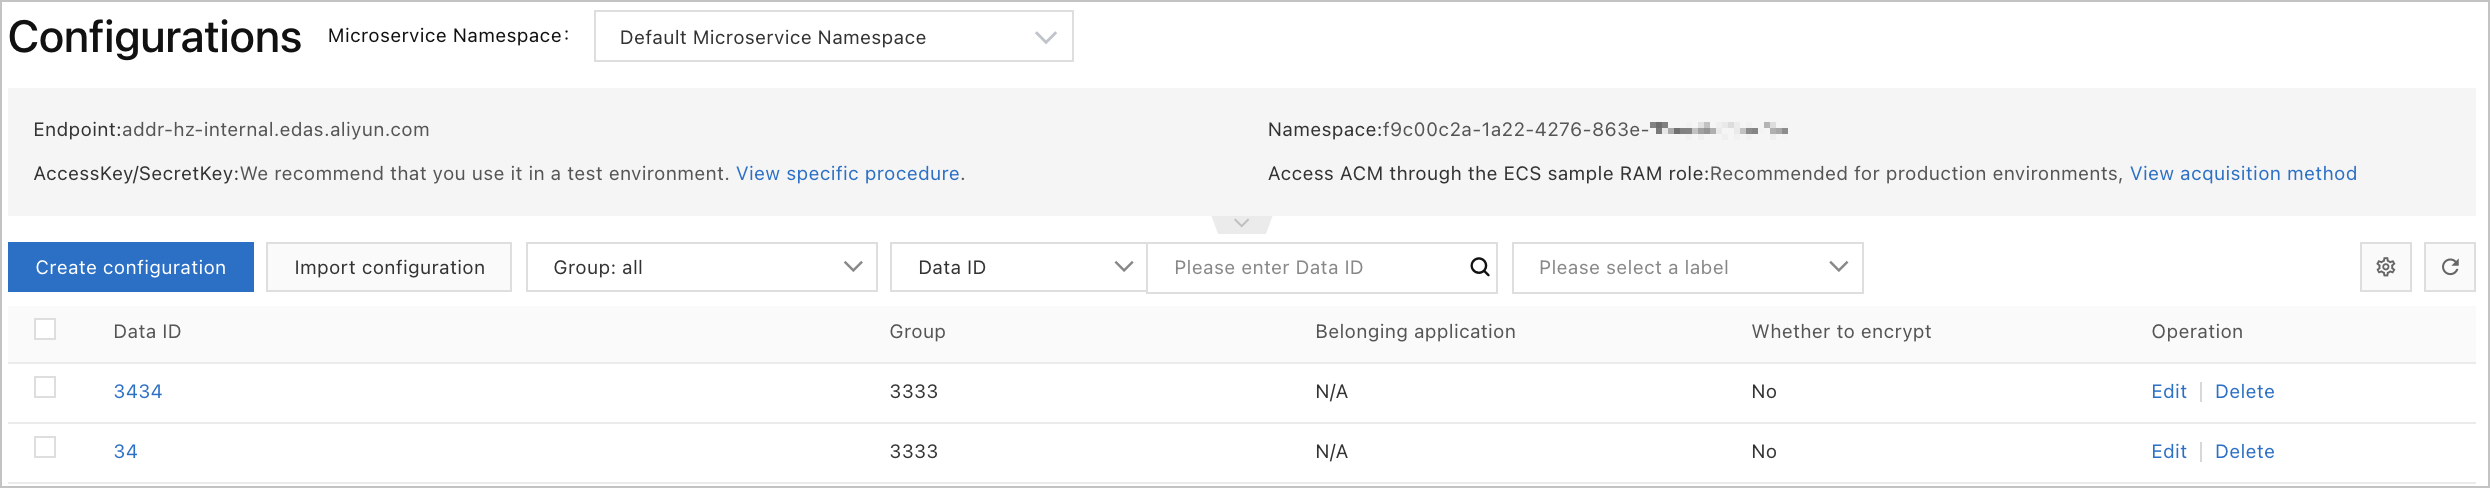 Set filter conditions to filter configuration records